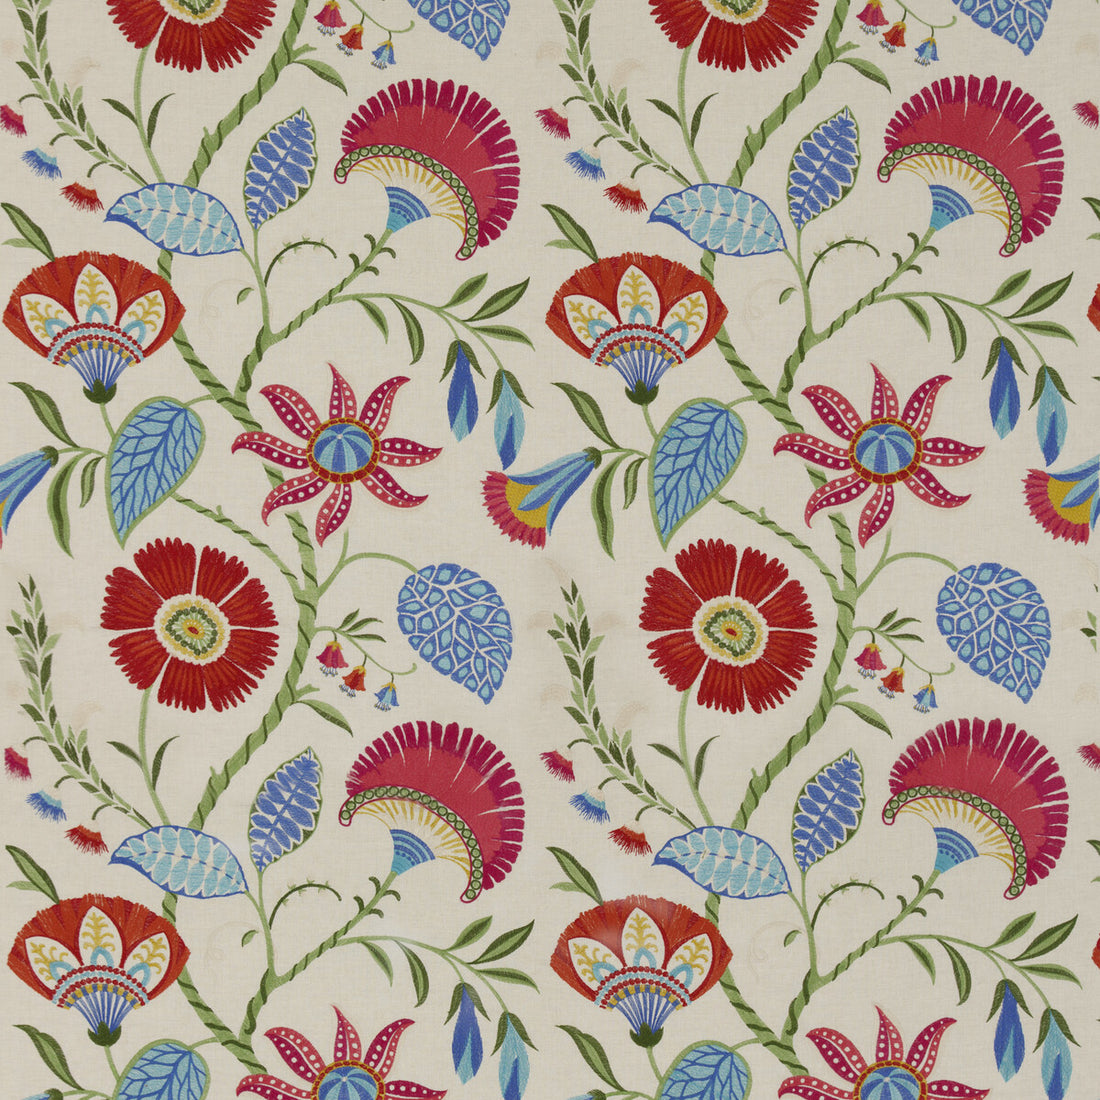 Montserrat fabric in tropical color - pattern PF50435.1.0 - by Baker Lifestyle in the Carnival collection